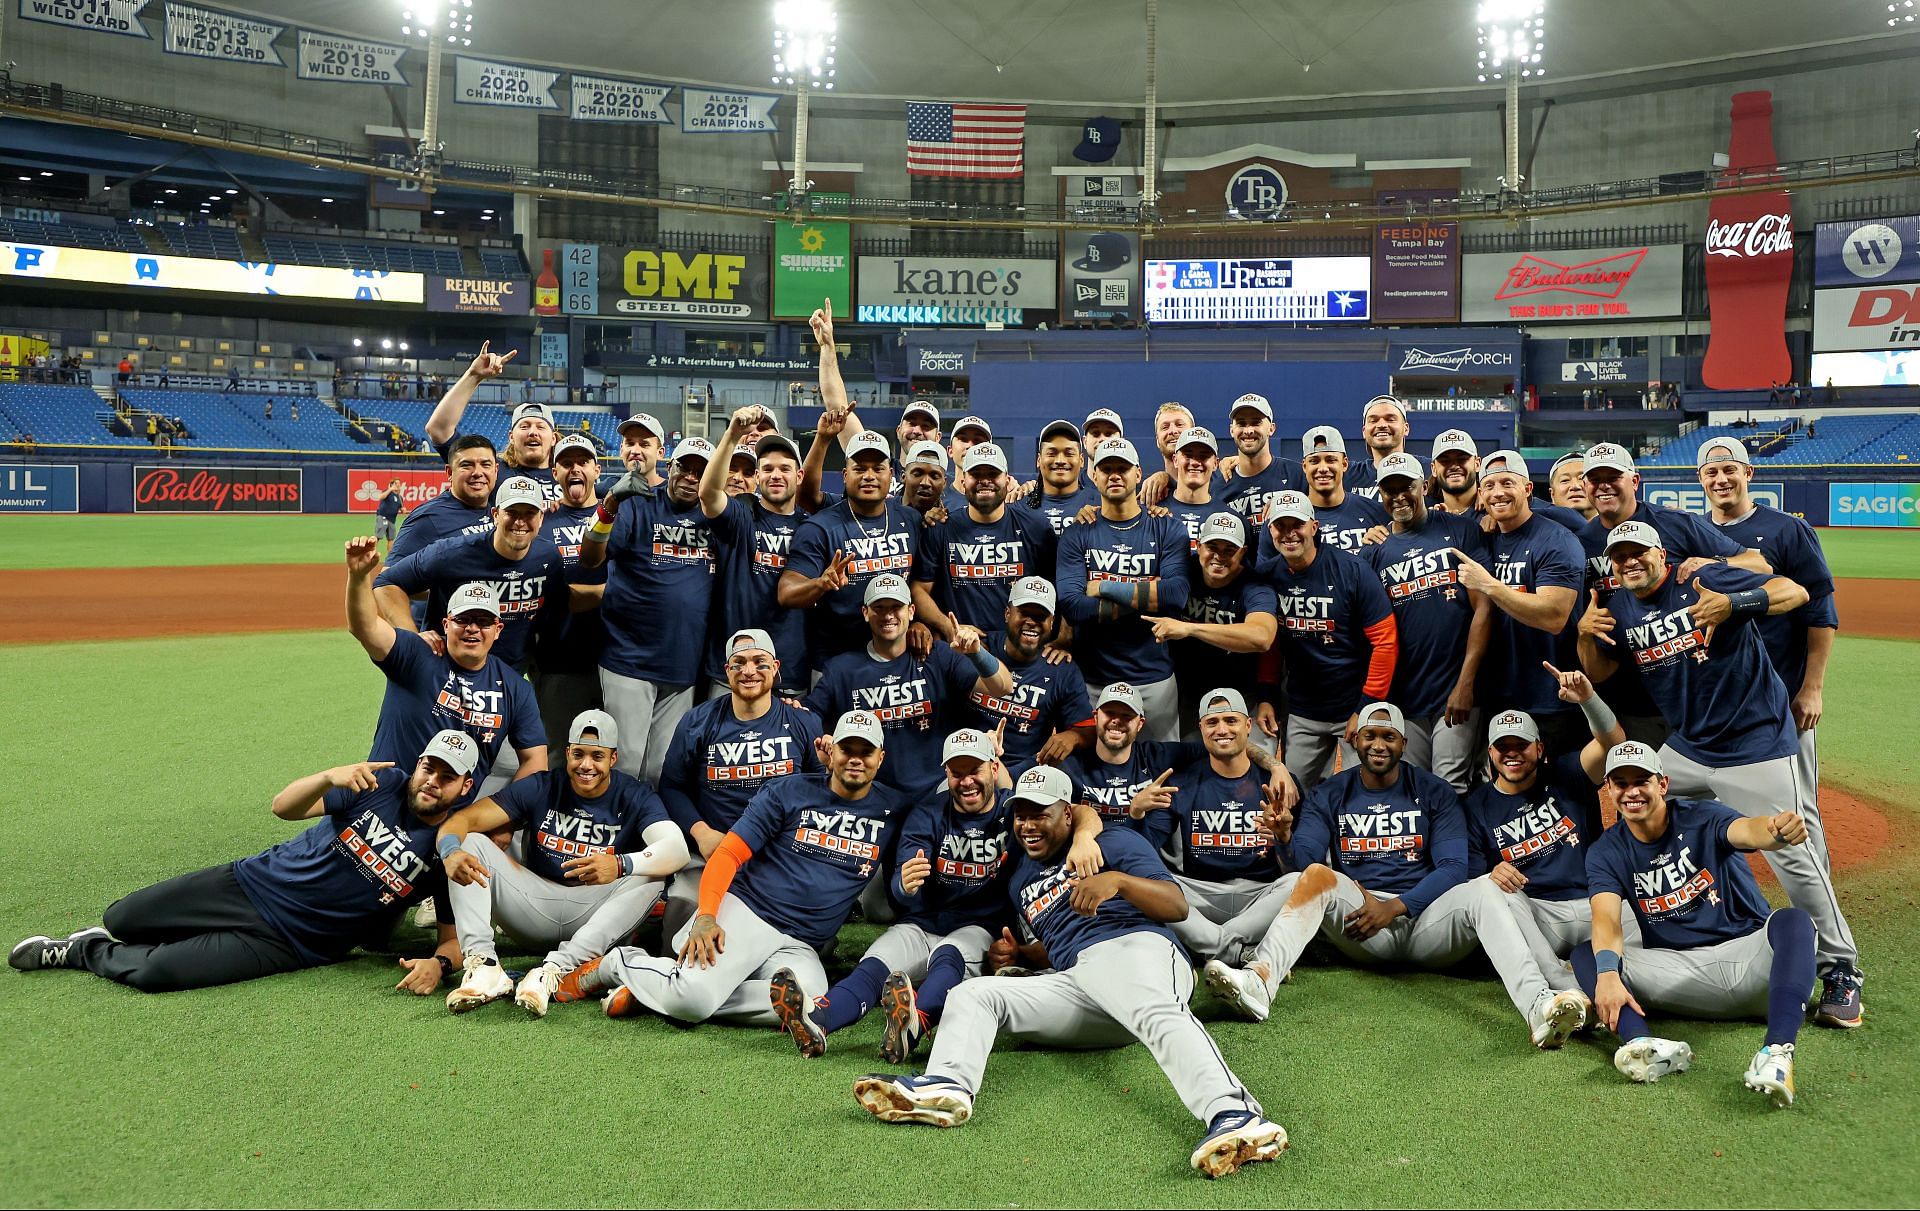 Houston Astros Spring Training Tickets How to buy, best prices and more